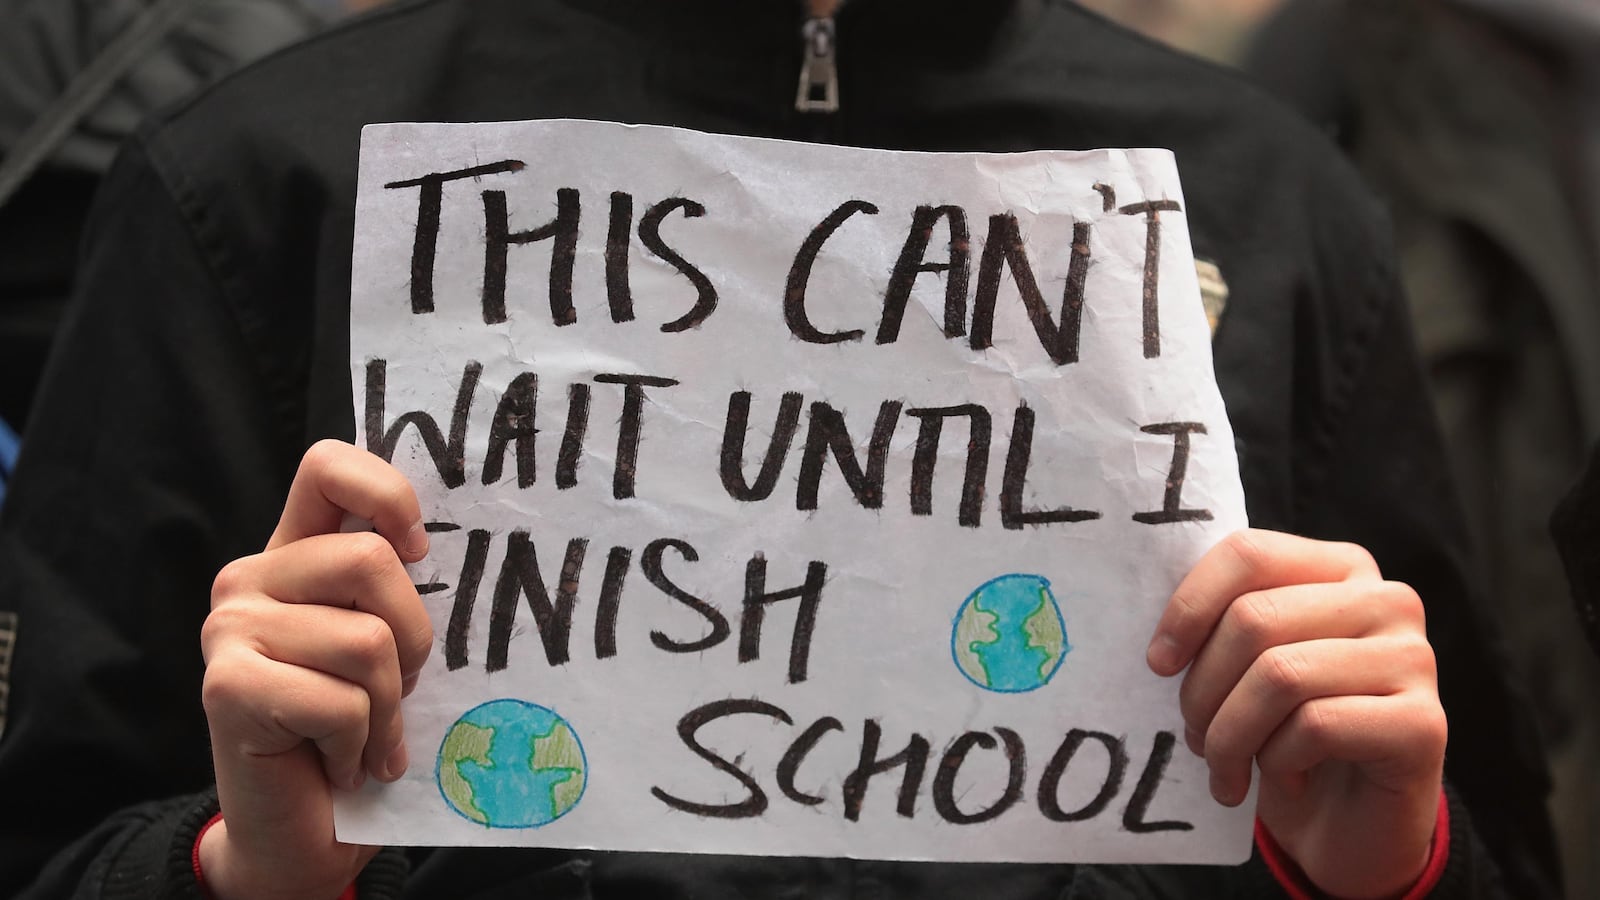 A student holds up a sign that says, “This can’t wait until I finish school.” It has two pictures of the earth on it.